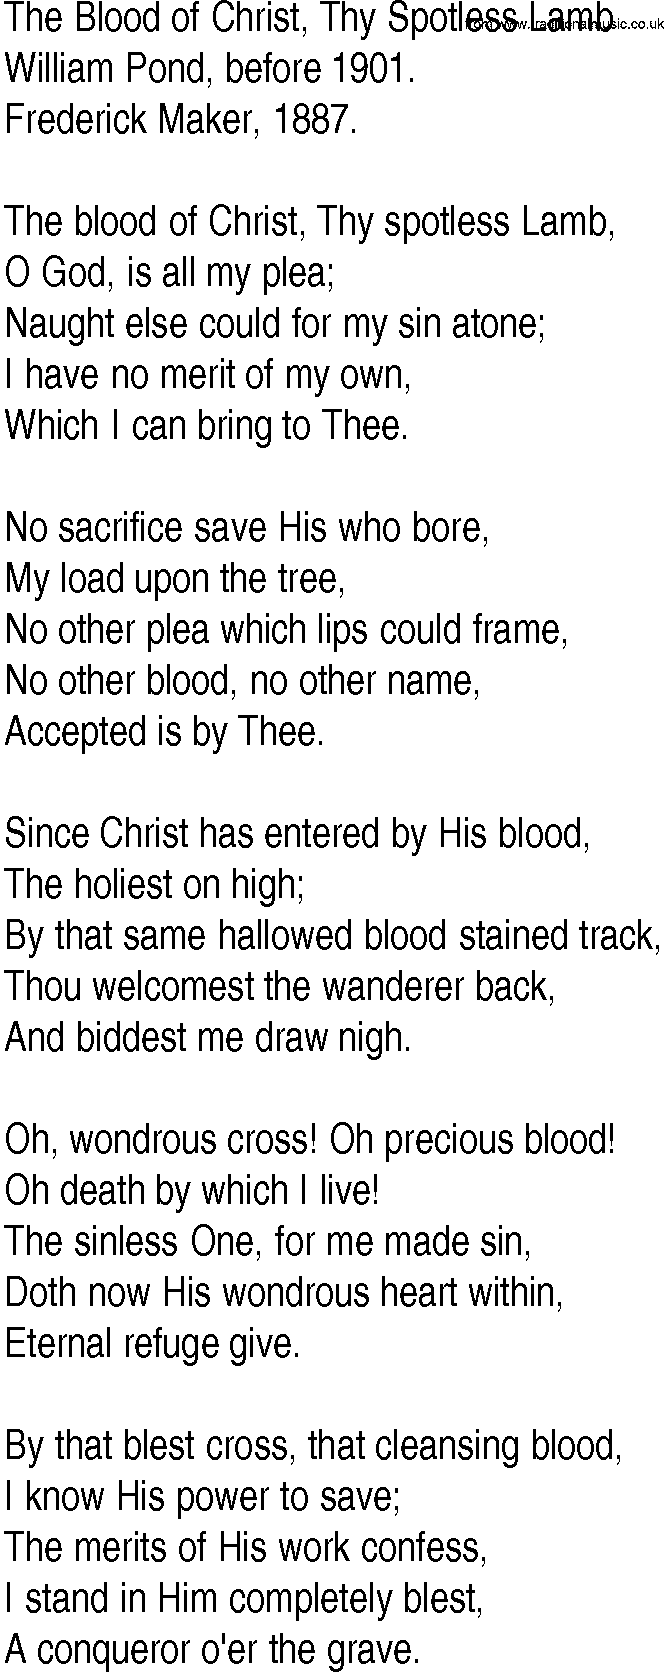 Hymn and Gospel Song: The Blood of Christ, Thy Spotless Lamb by William Pond before lyrics